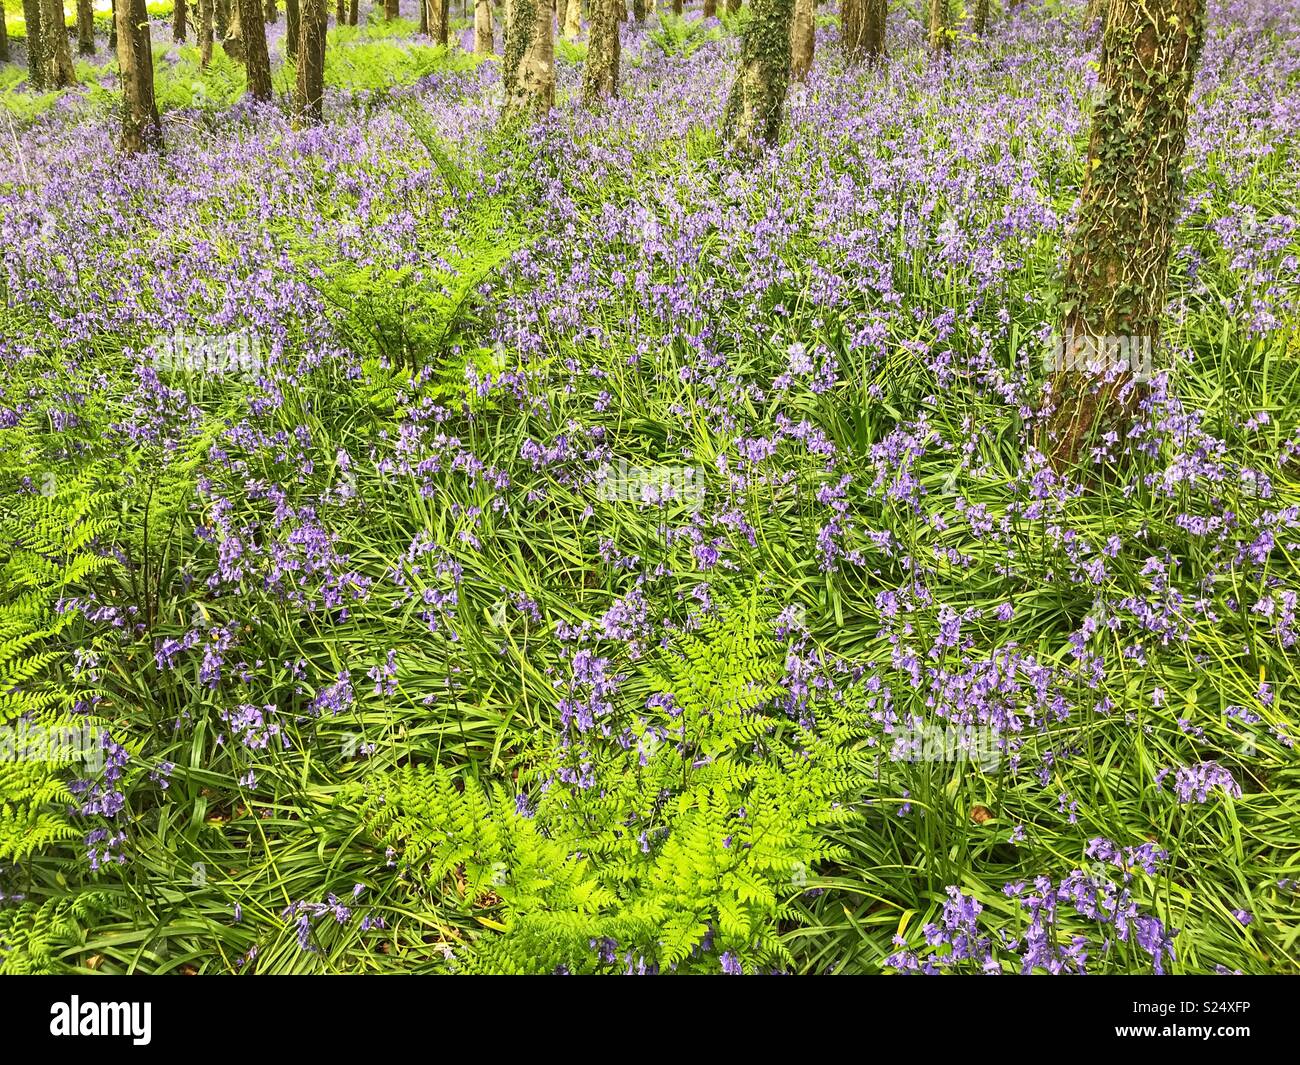 Bluebells and ferns in a wood in Springtime, Dorset, England Stock Photo